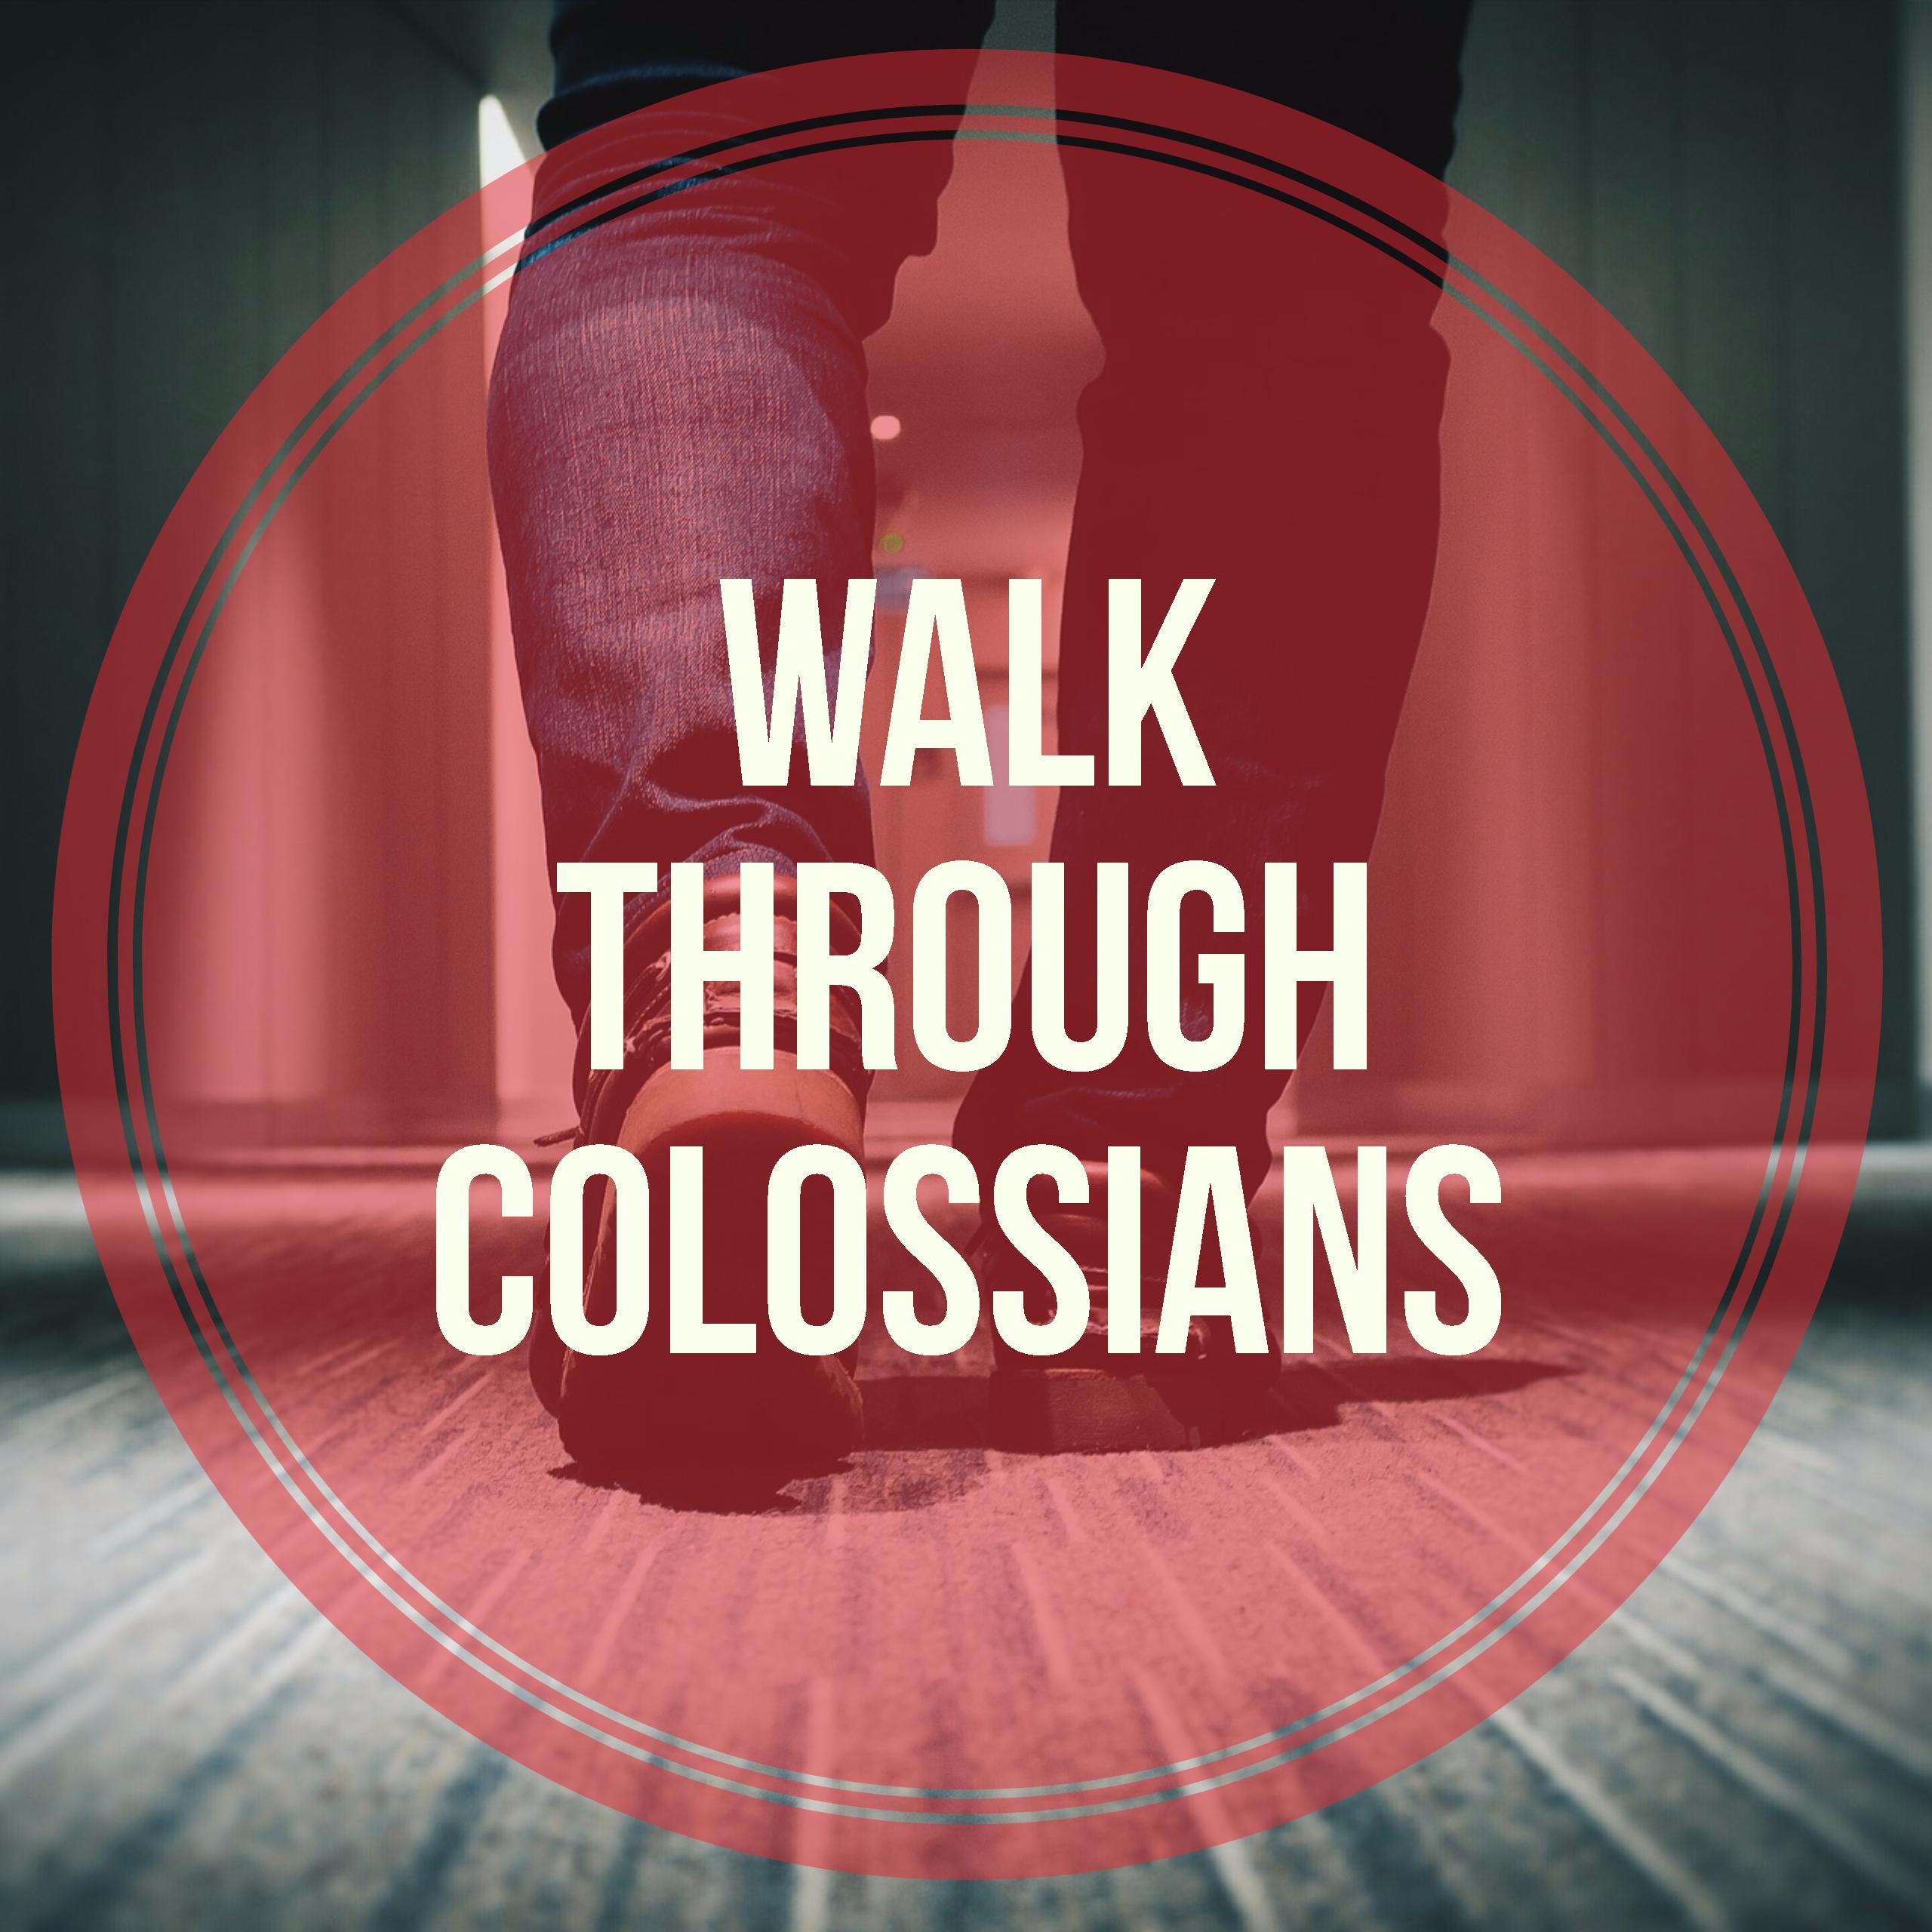 July 30, 2017: Colossians "Focus".